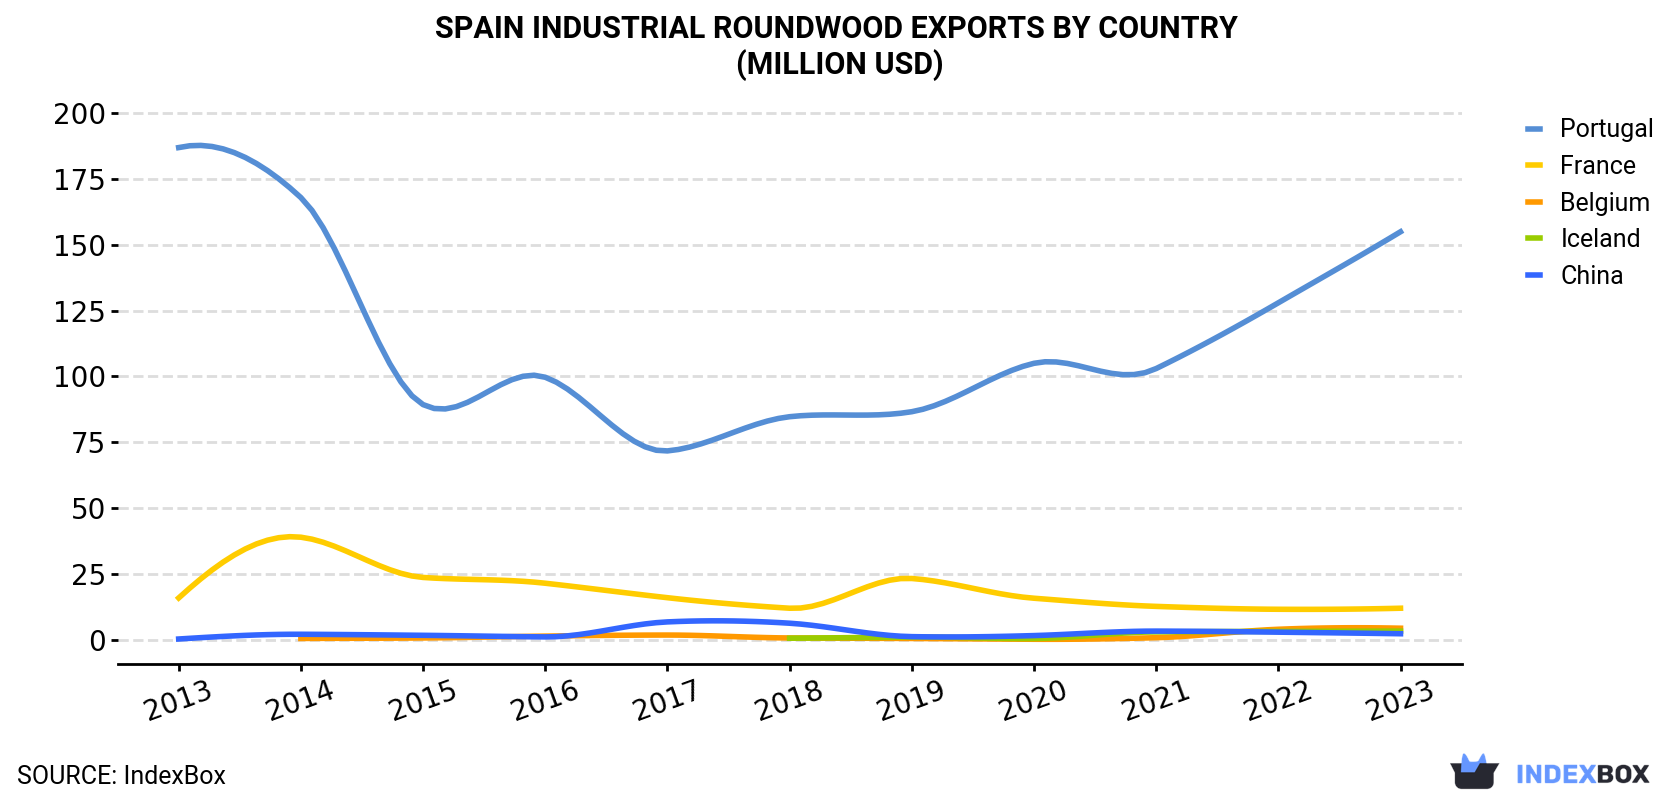 Spain Industrial Roundwood Exports By Country (Million USD)